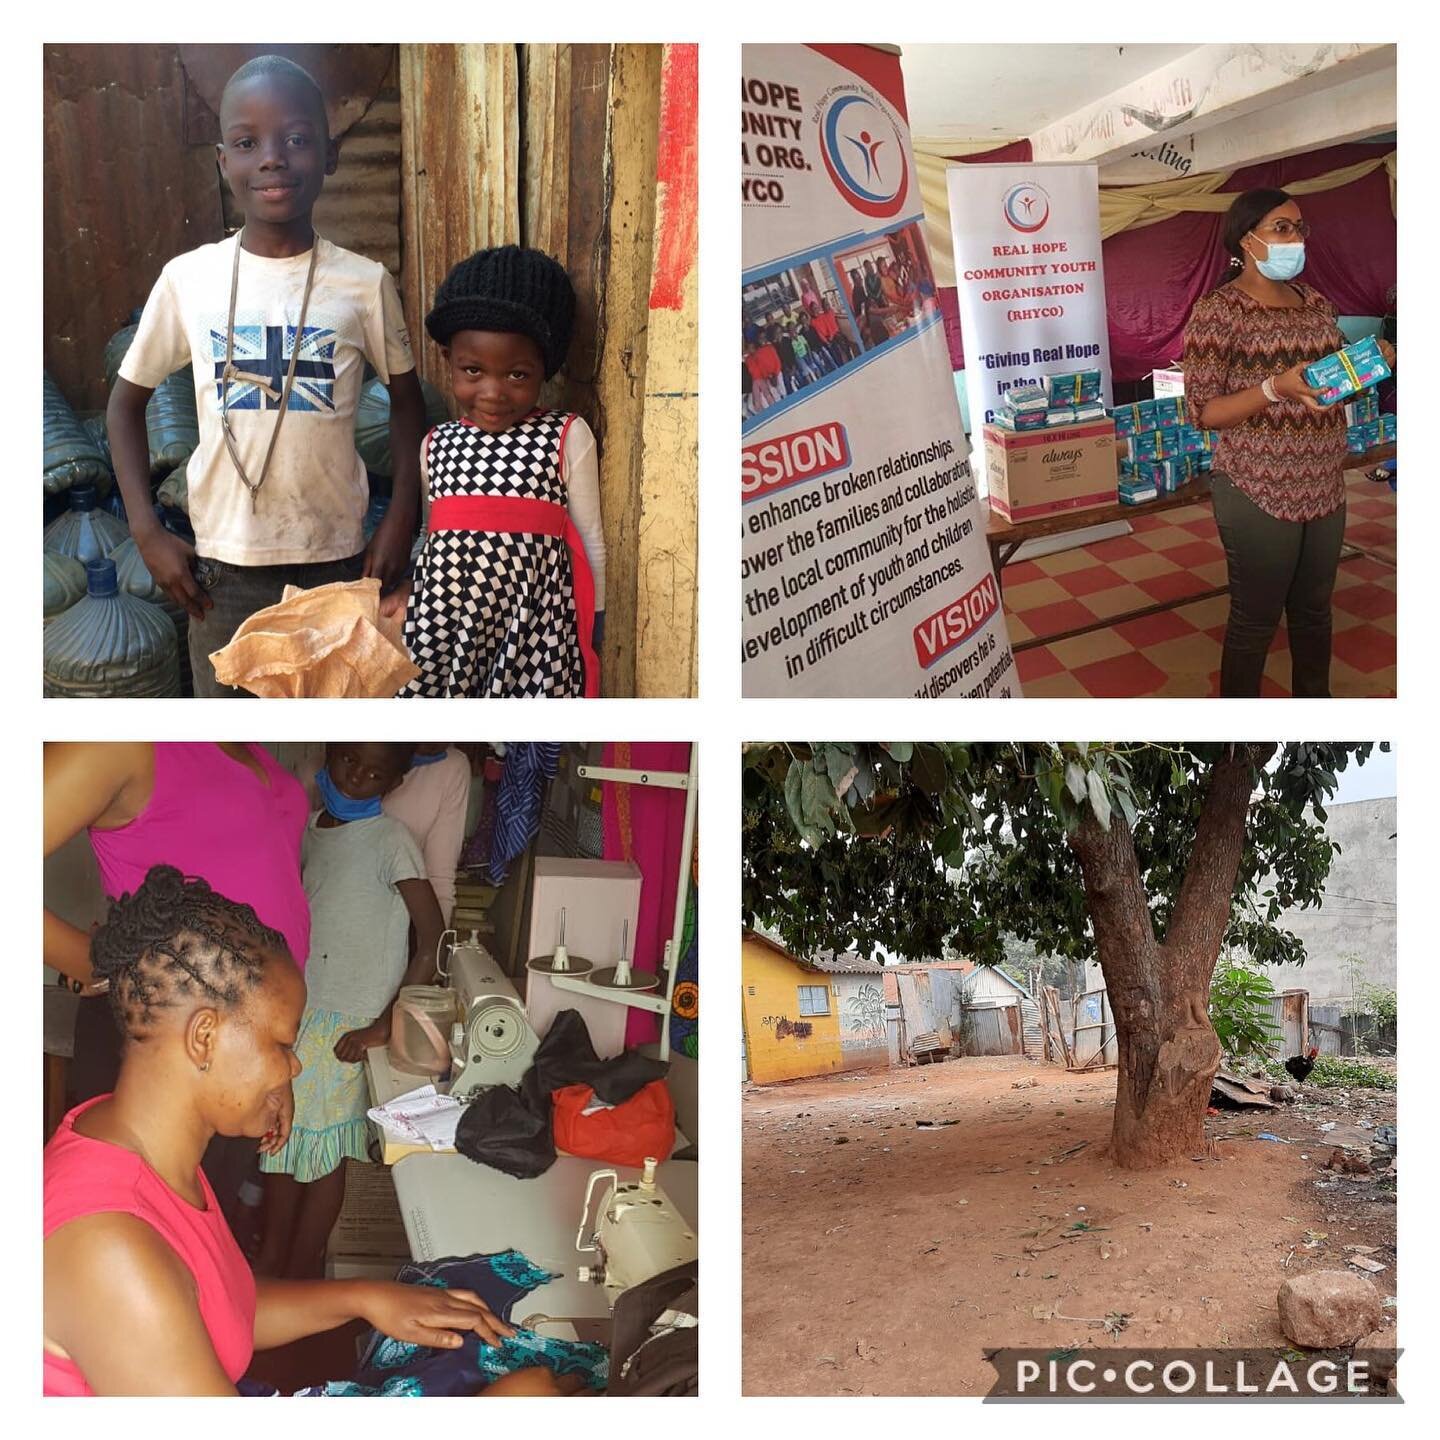 ALL IN A DAY&rsquo;S WORK: In addition to taking care of the 74 sponsored children supported by their programme, the RHYCO team are working hard with community volunteers to deliver a number of additional Covid-19 programmes in the slums, including a